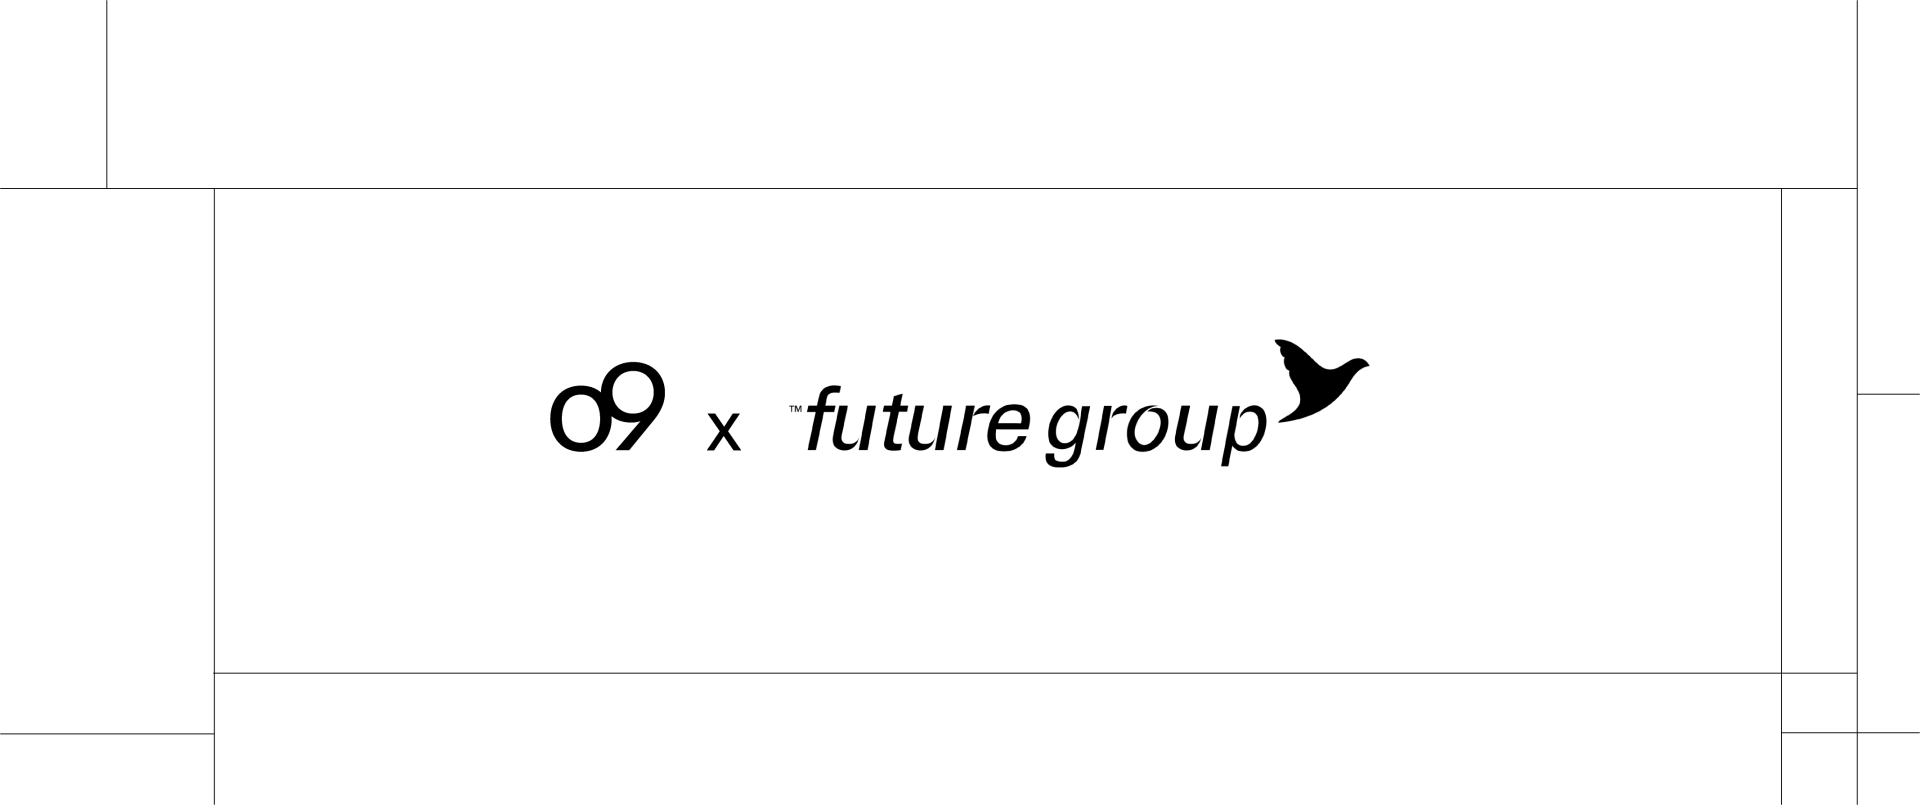 Future Group Partners With o9 Solutions in Their Retail 3.0 Journey